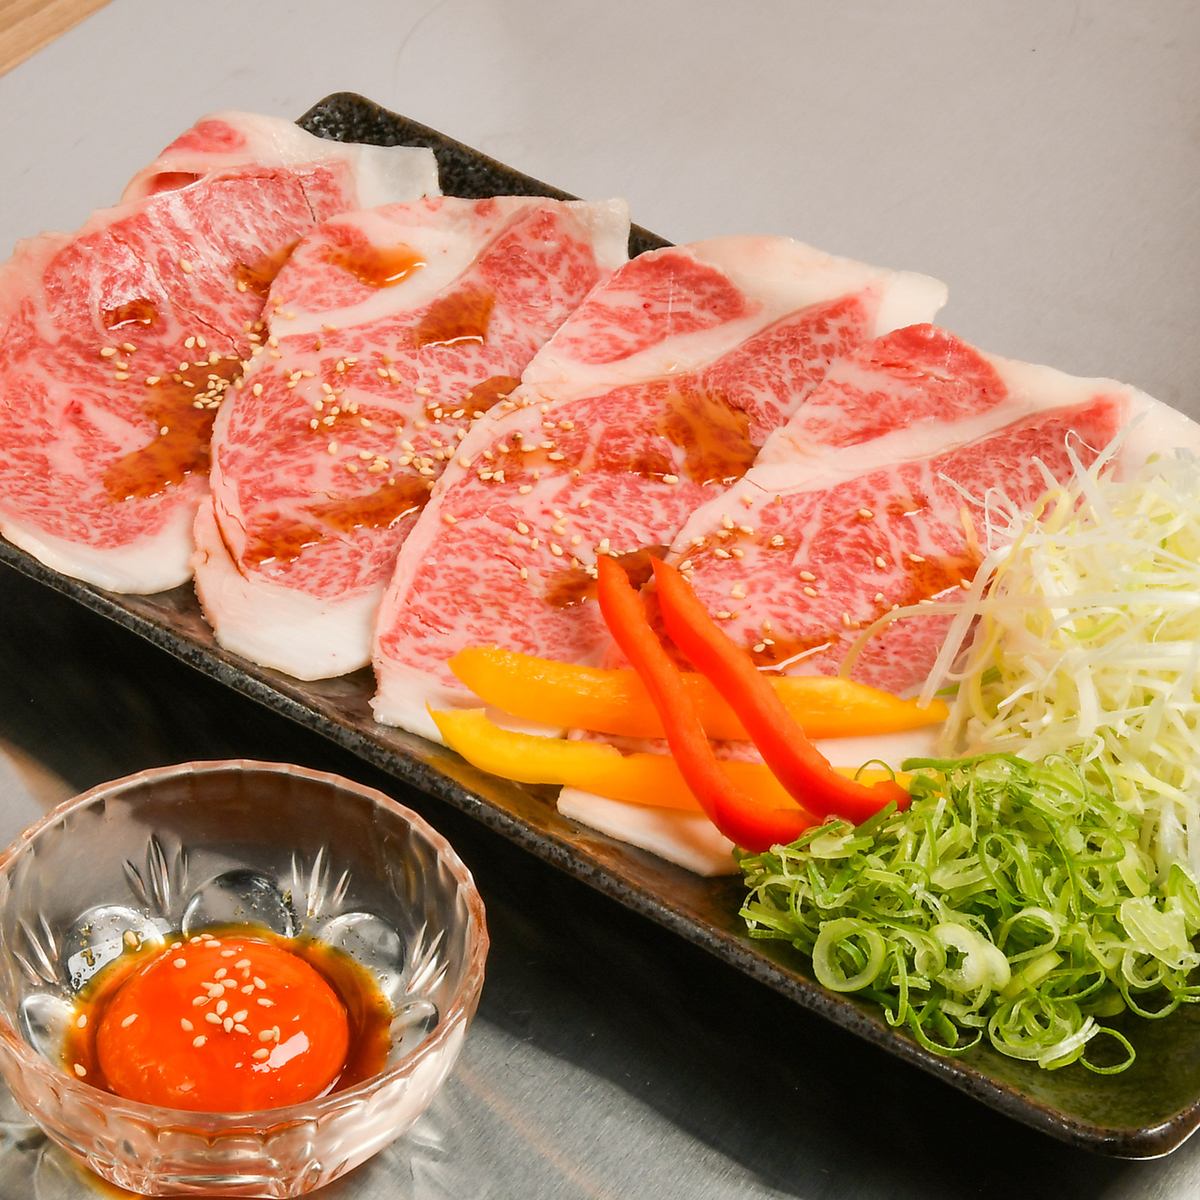 Enjoy A5 rank Kuroge Wagyu beef carefully selected by the chef! Excellent cost performance and open until 25:00